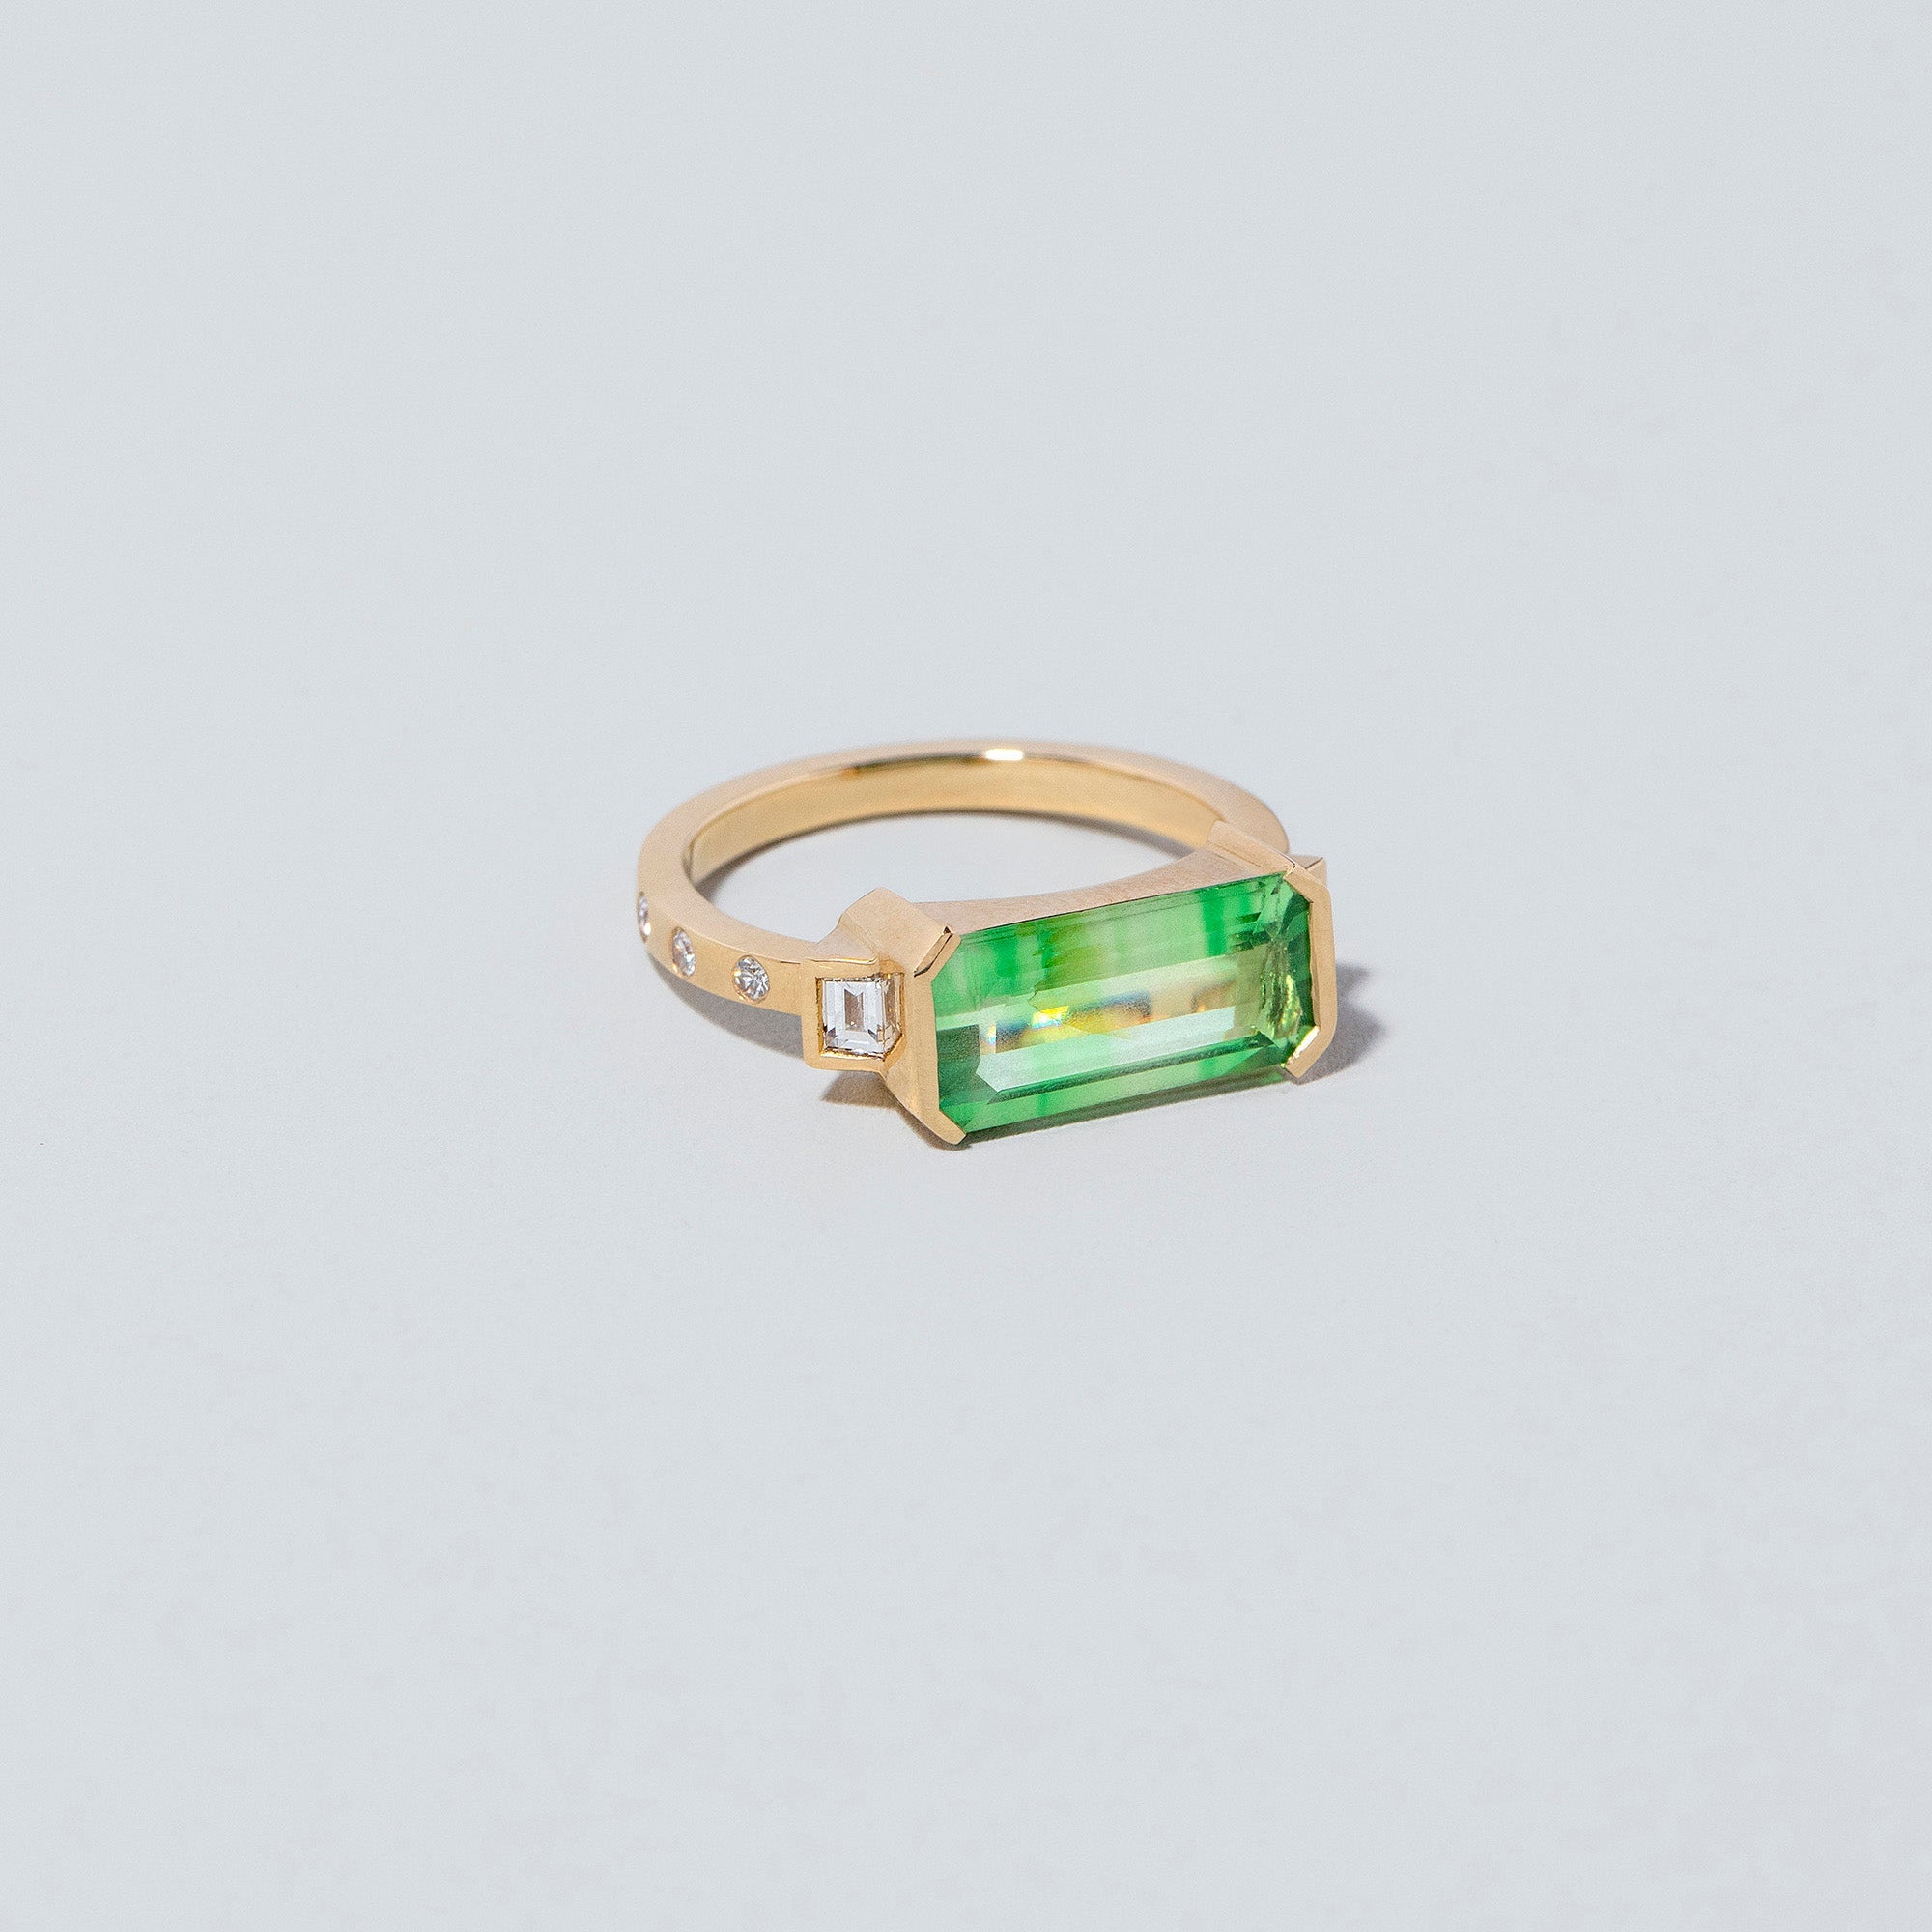 product_details:: Formation Ring on light color background.